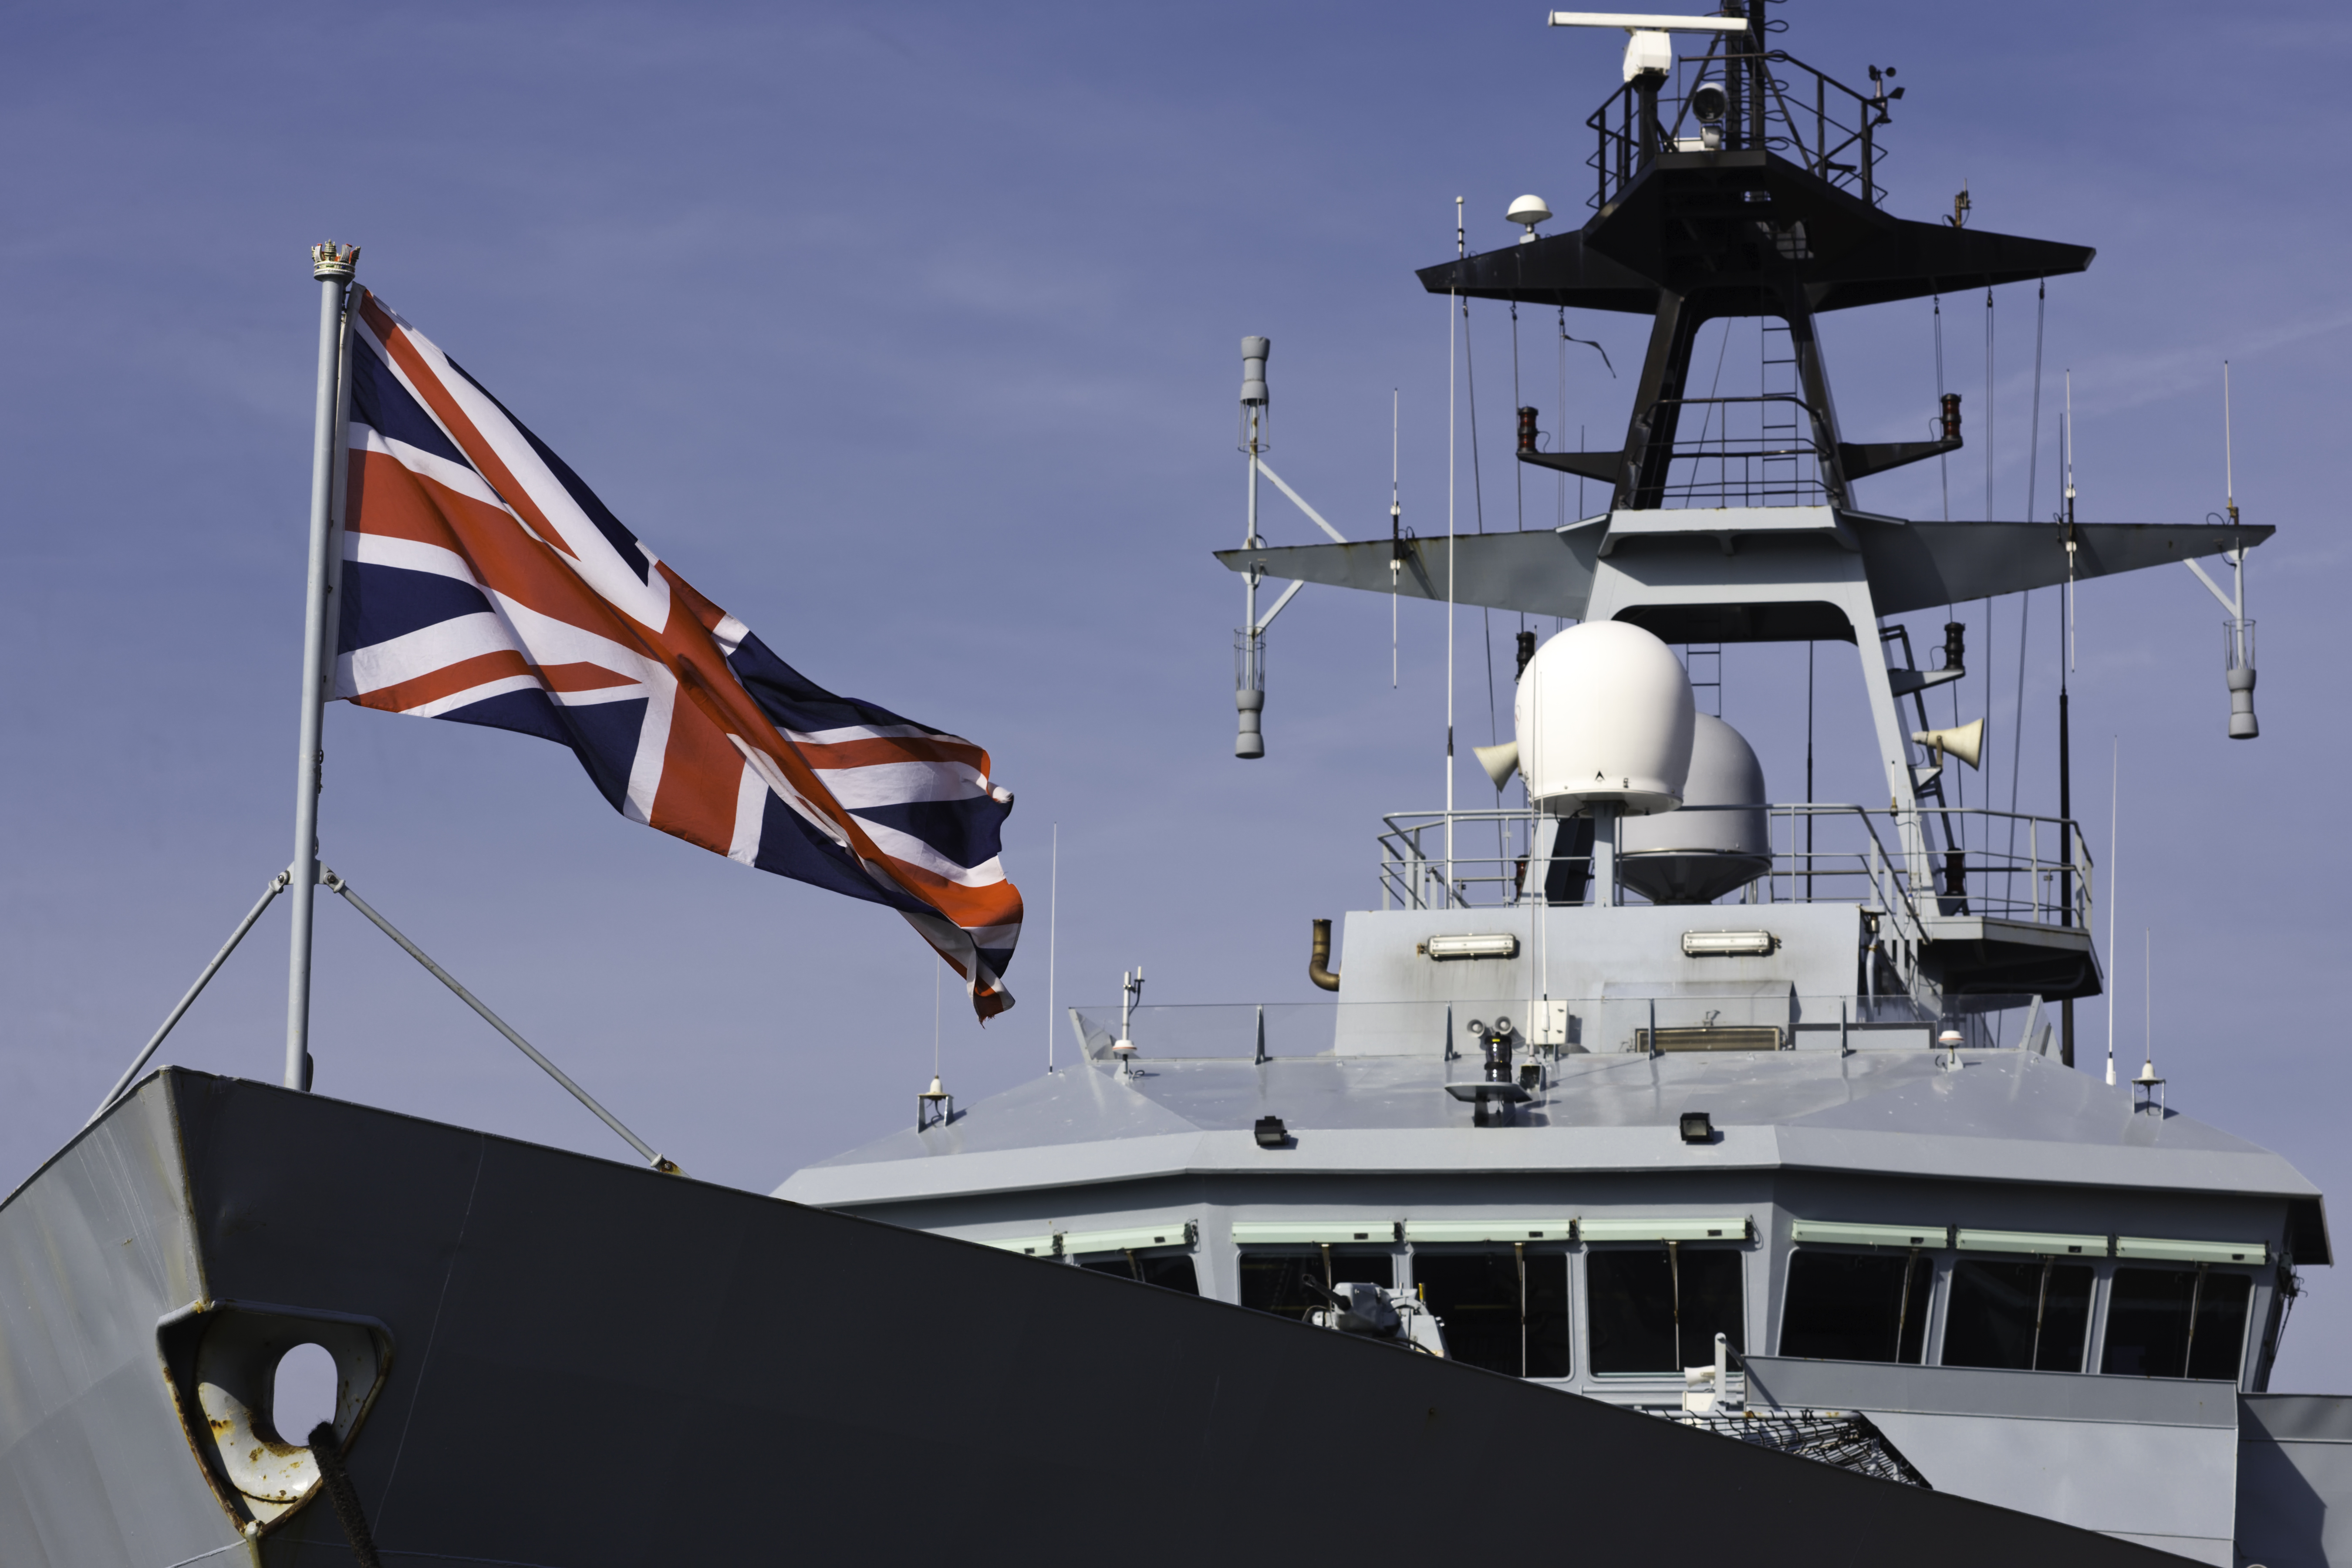 UK seeks top role in maritime tech with Maritime 2050